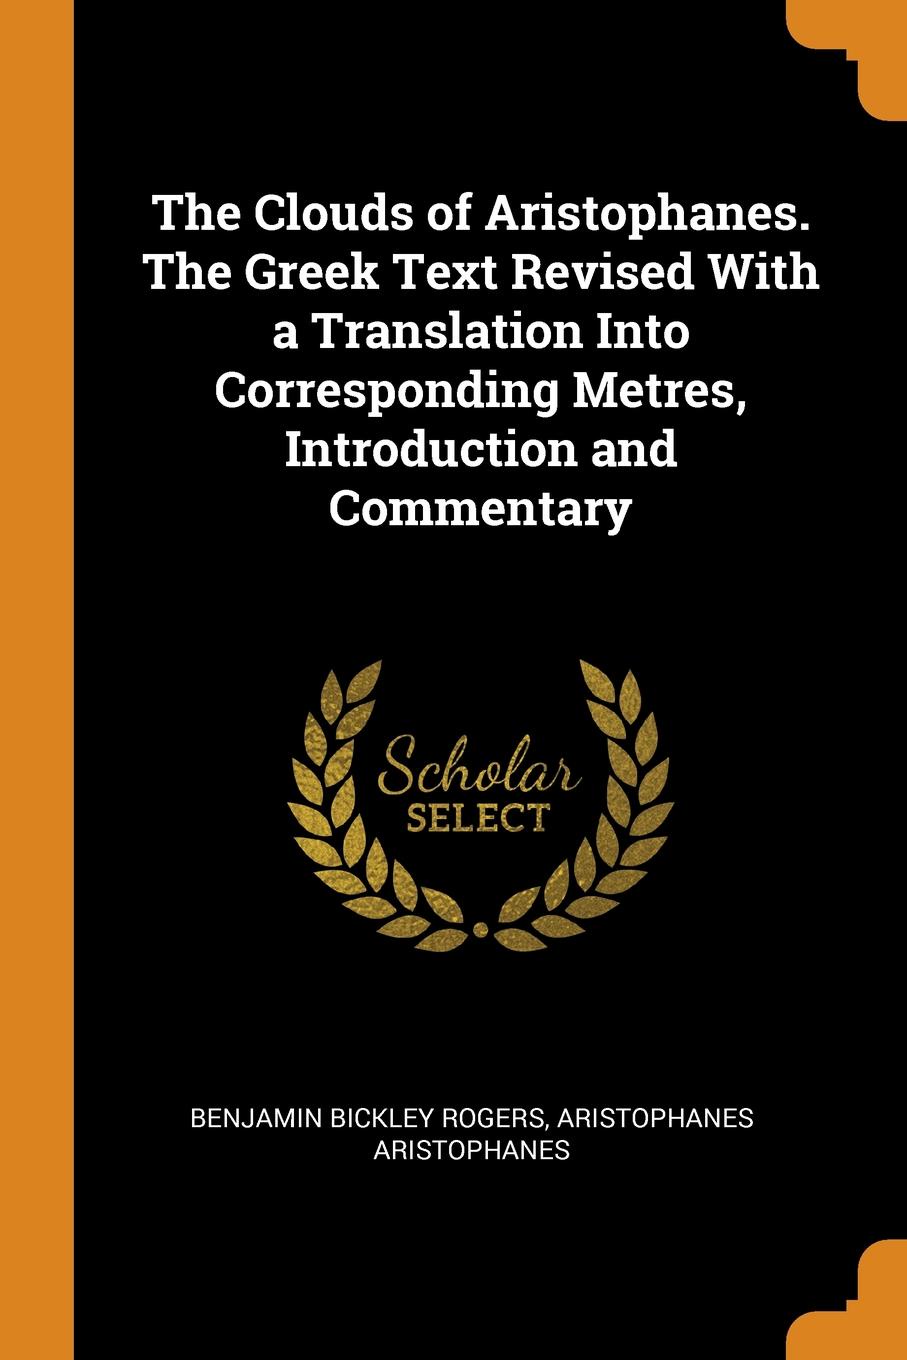 The Clouds of Aristophanes. The Greek Text Revised With a Translation Into Corresponding Metres, Introduction and Commentary